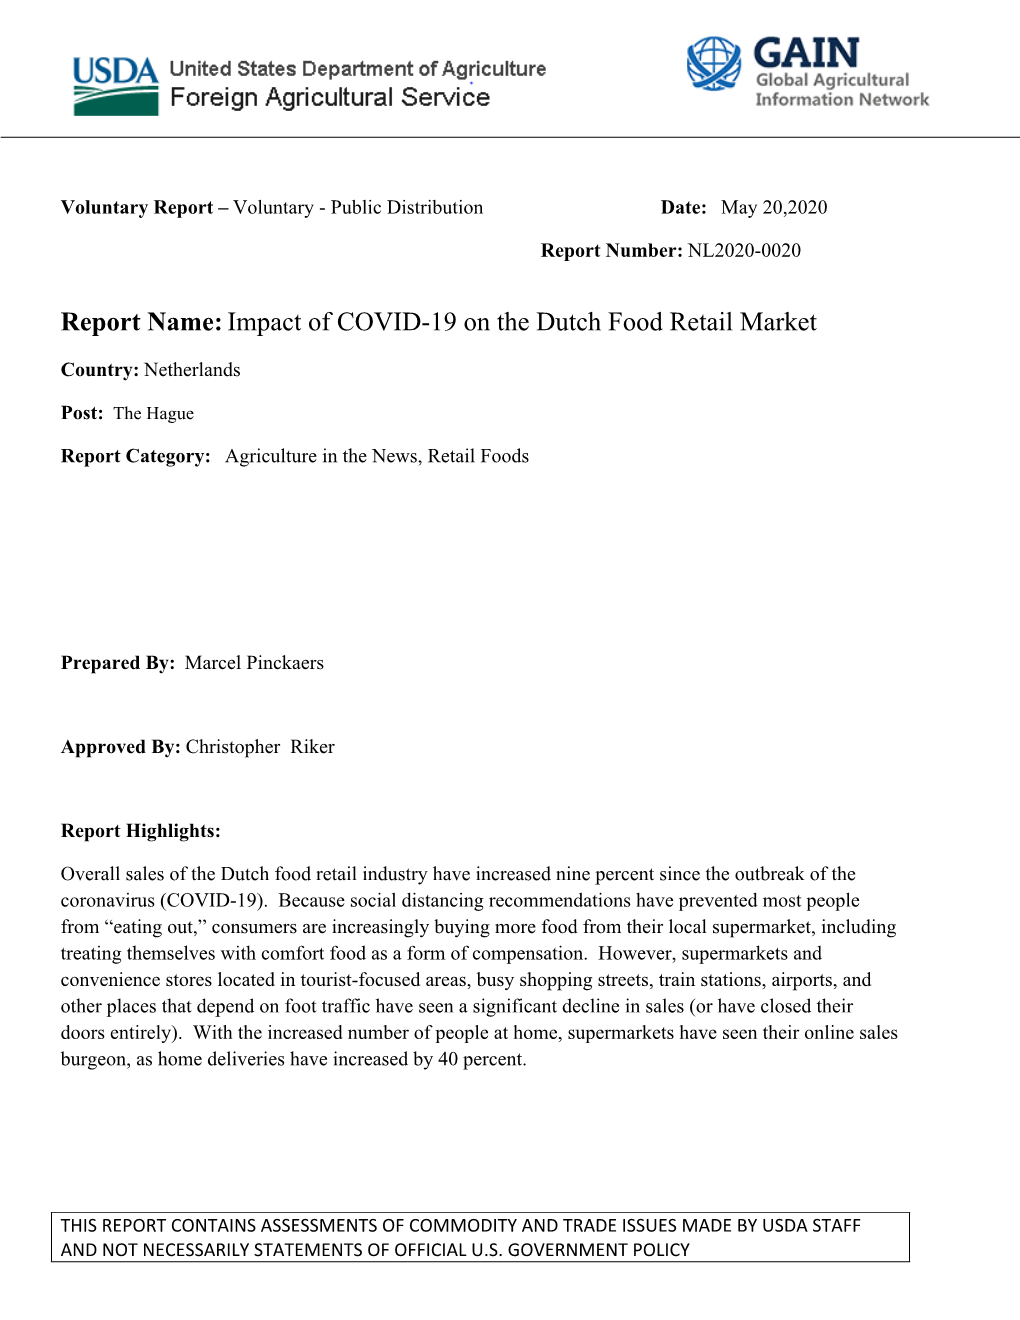 Impact of COVID-19 on the Dutch Food Retail Market